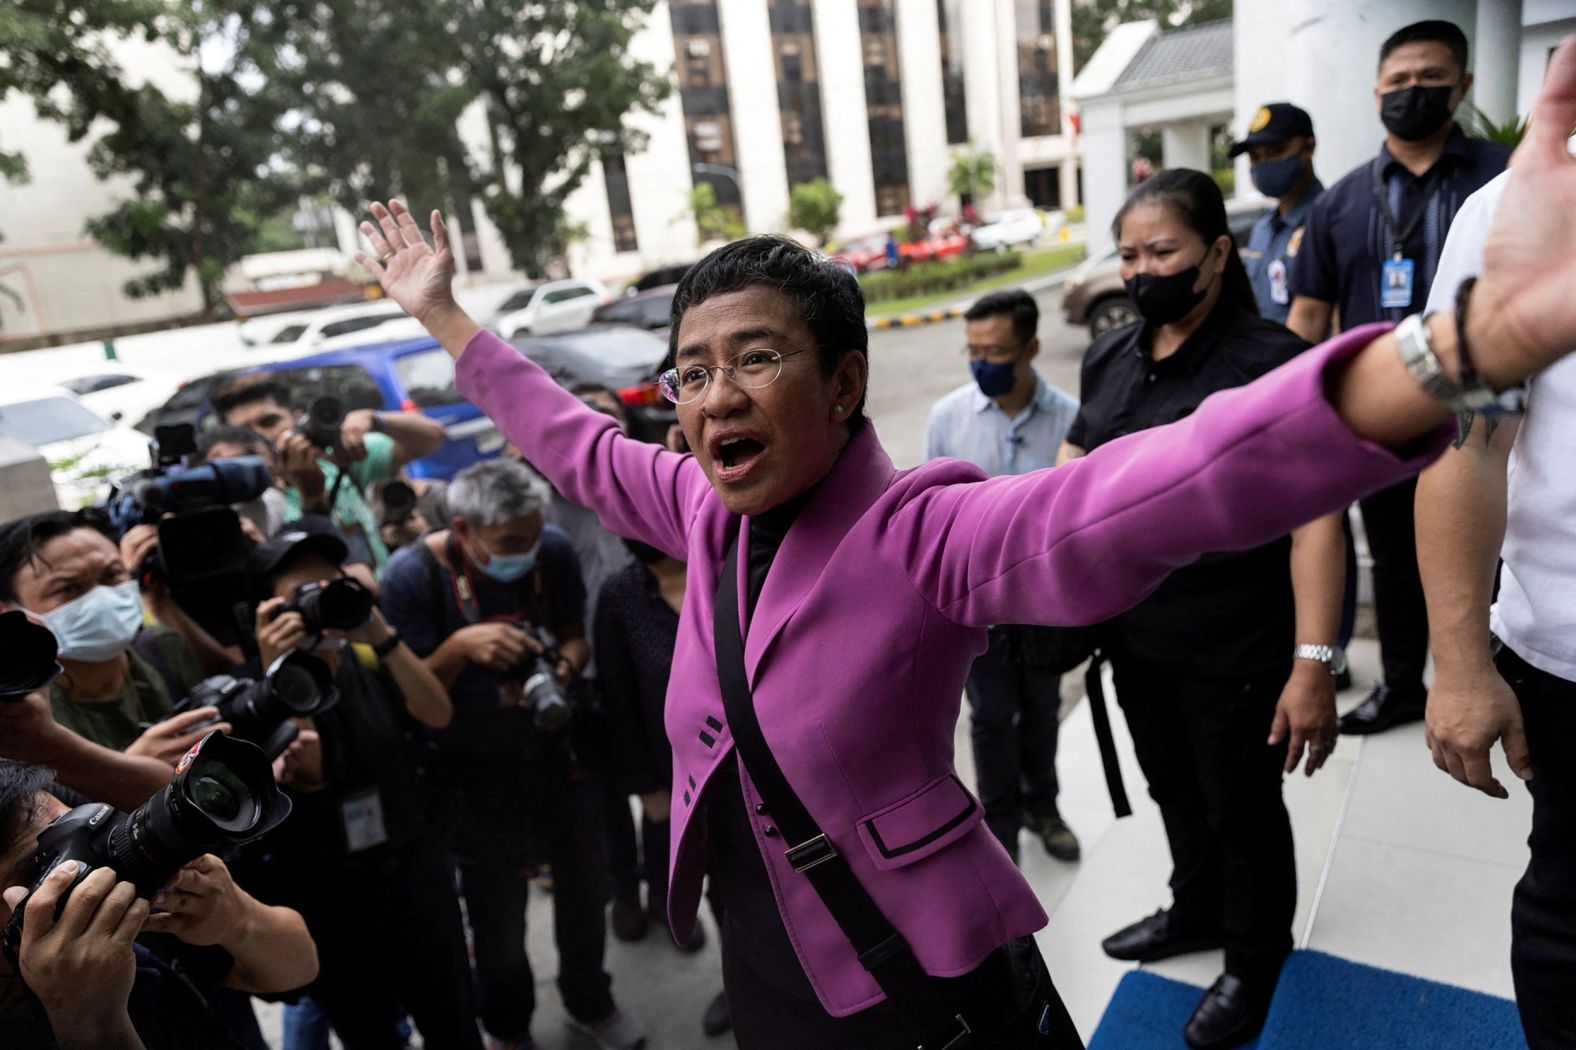 Nobel Laureate Maria Ressa gestures outside the Court of Tax Appeals on Wednesday, January 18, in Quezon City, Philippines, after being acquitted of four counts of tax violations filed in 2018 by former President Rodrigo Duterte's government. Ressa, the CEO and founder of news site Rappler and a former CNN bureau chief, told CNN after the verdict, "I was hoping for an acquittal and I was thrilled to get it ... having said that, I think our victory is not just Rappler's. It is for every single person who's been unjustly accused with politically motivated charges."